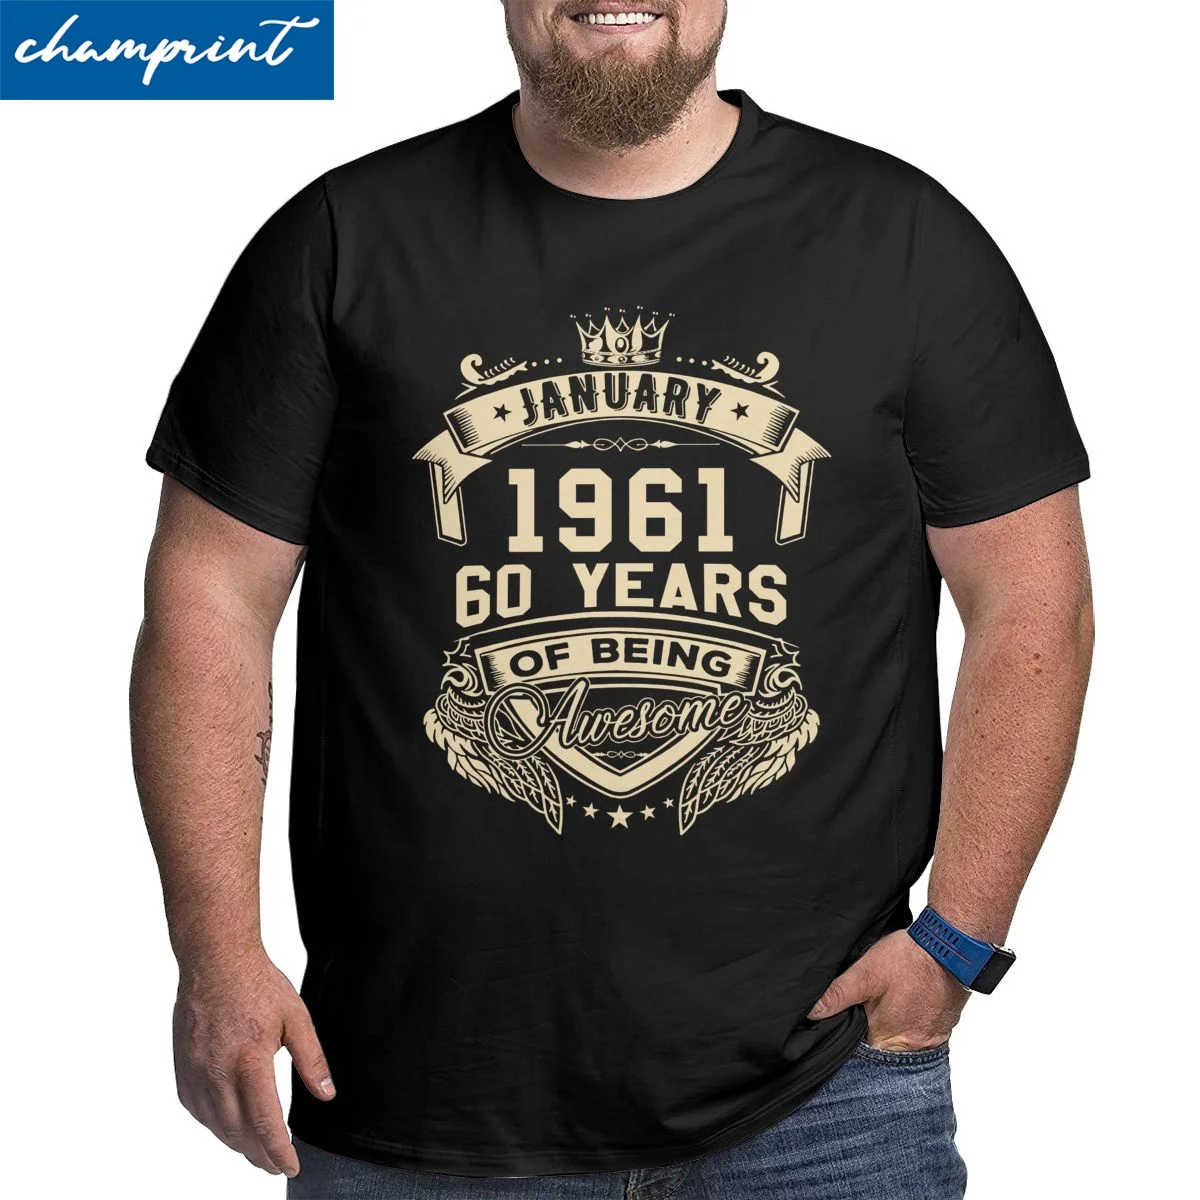 

Born In January 1961 60 Years Of Being Awesome T Shirts Men Vintage T-Shirts 60th Birthday Gift Big Tall Tee Shirt Plus Size 6XL